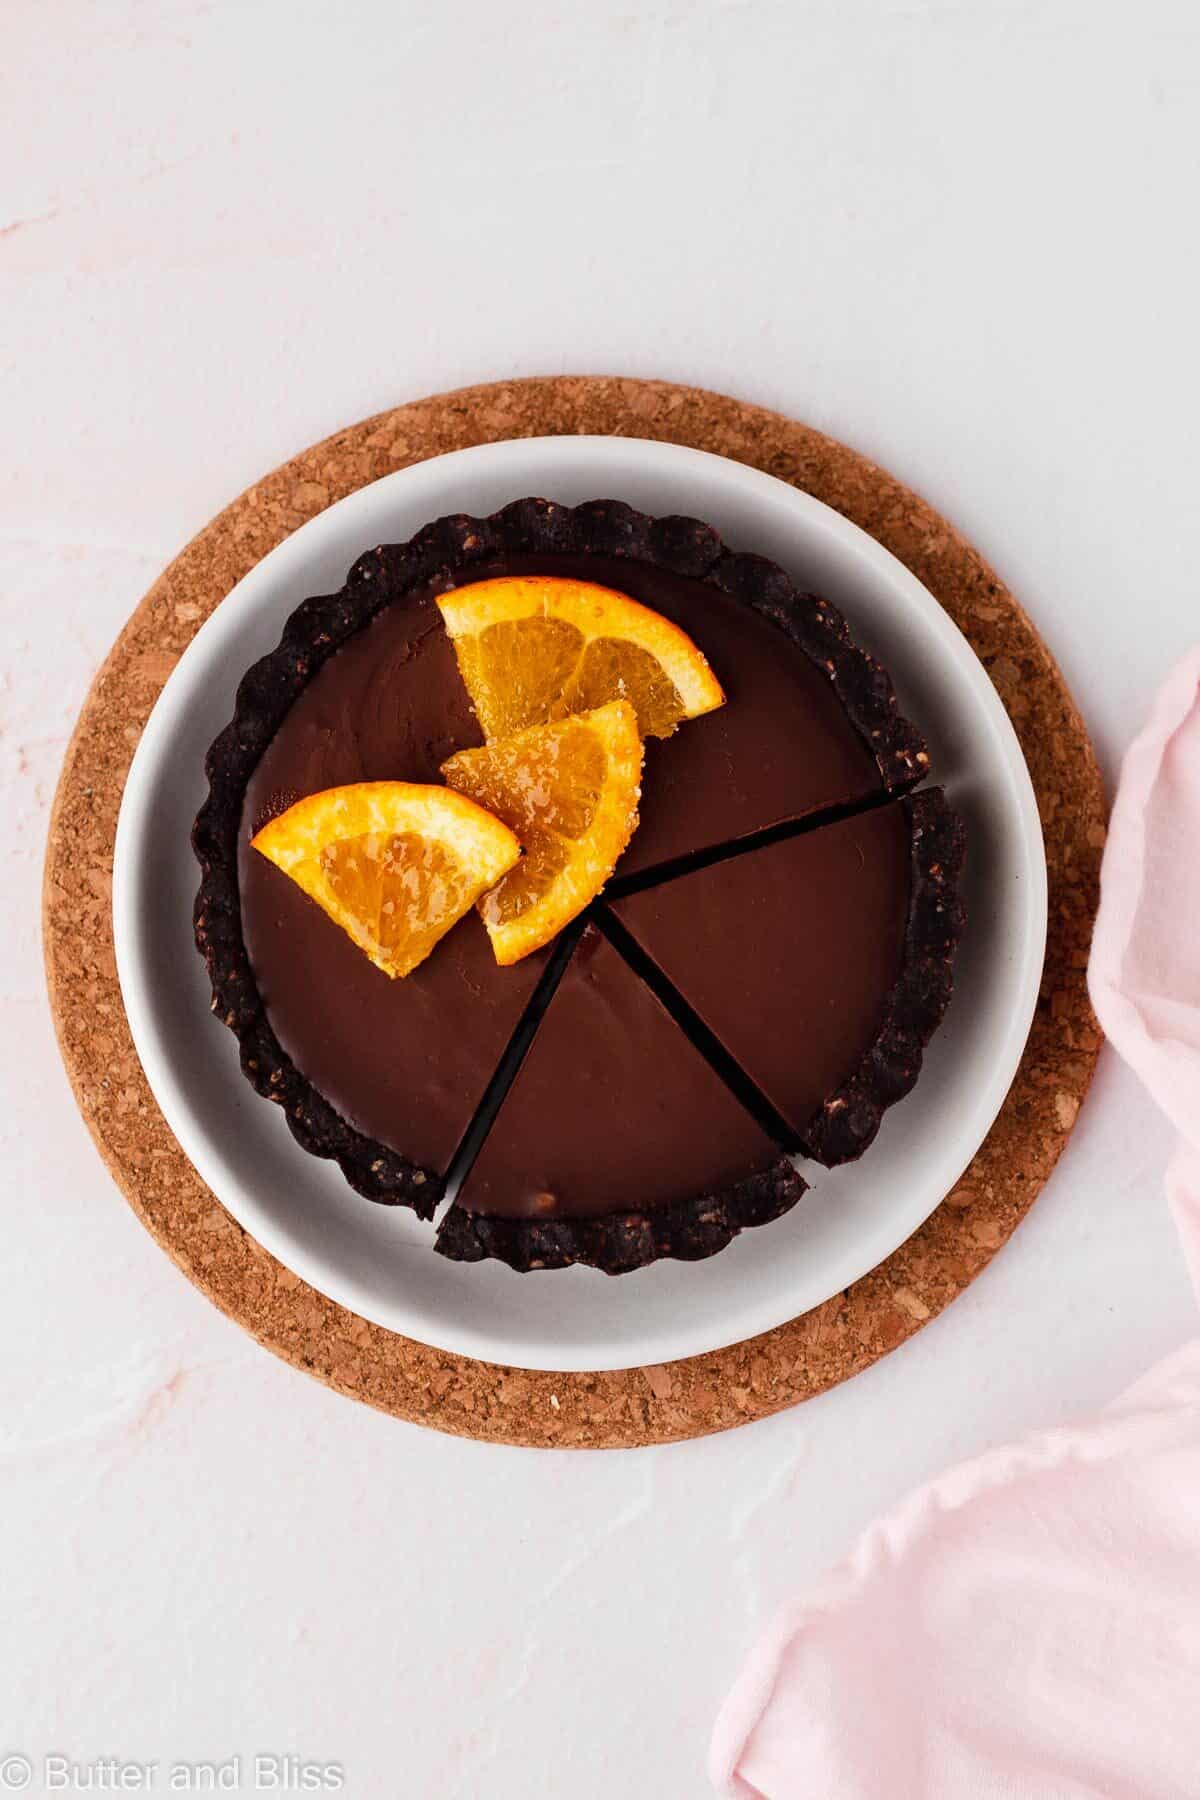 A mini gluten free chocolate orange tart with slices cut on a small plate